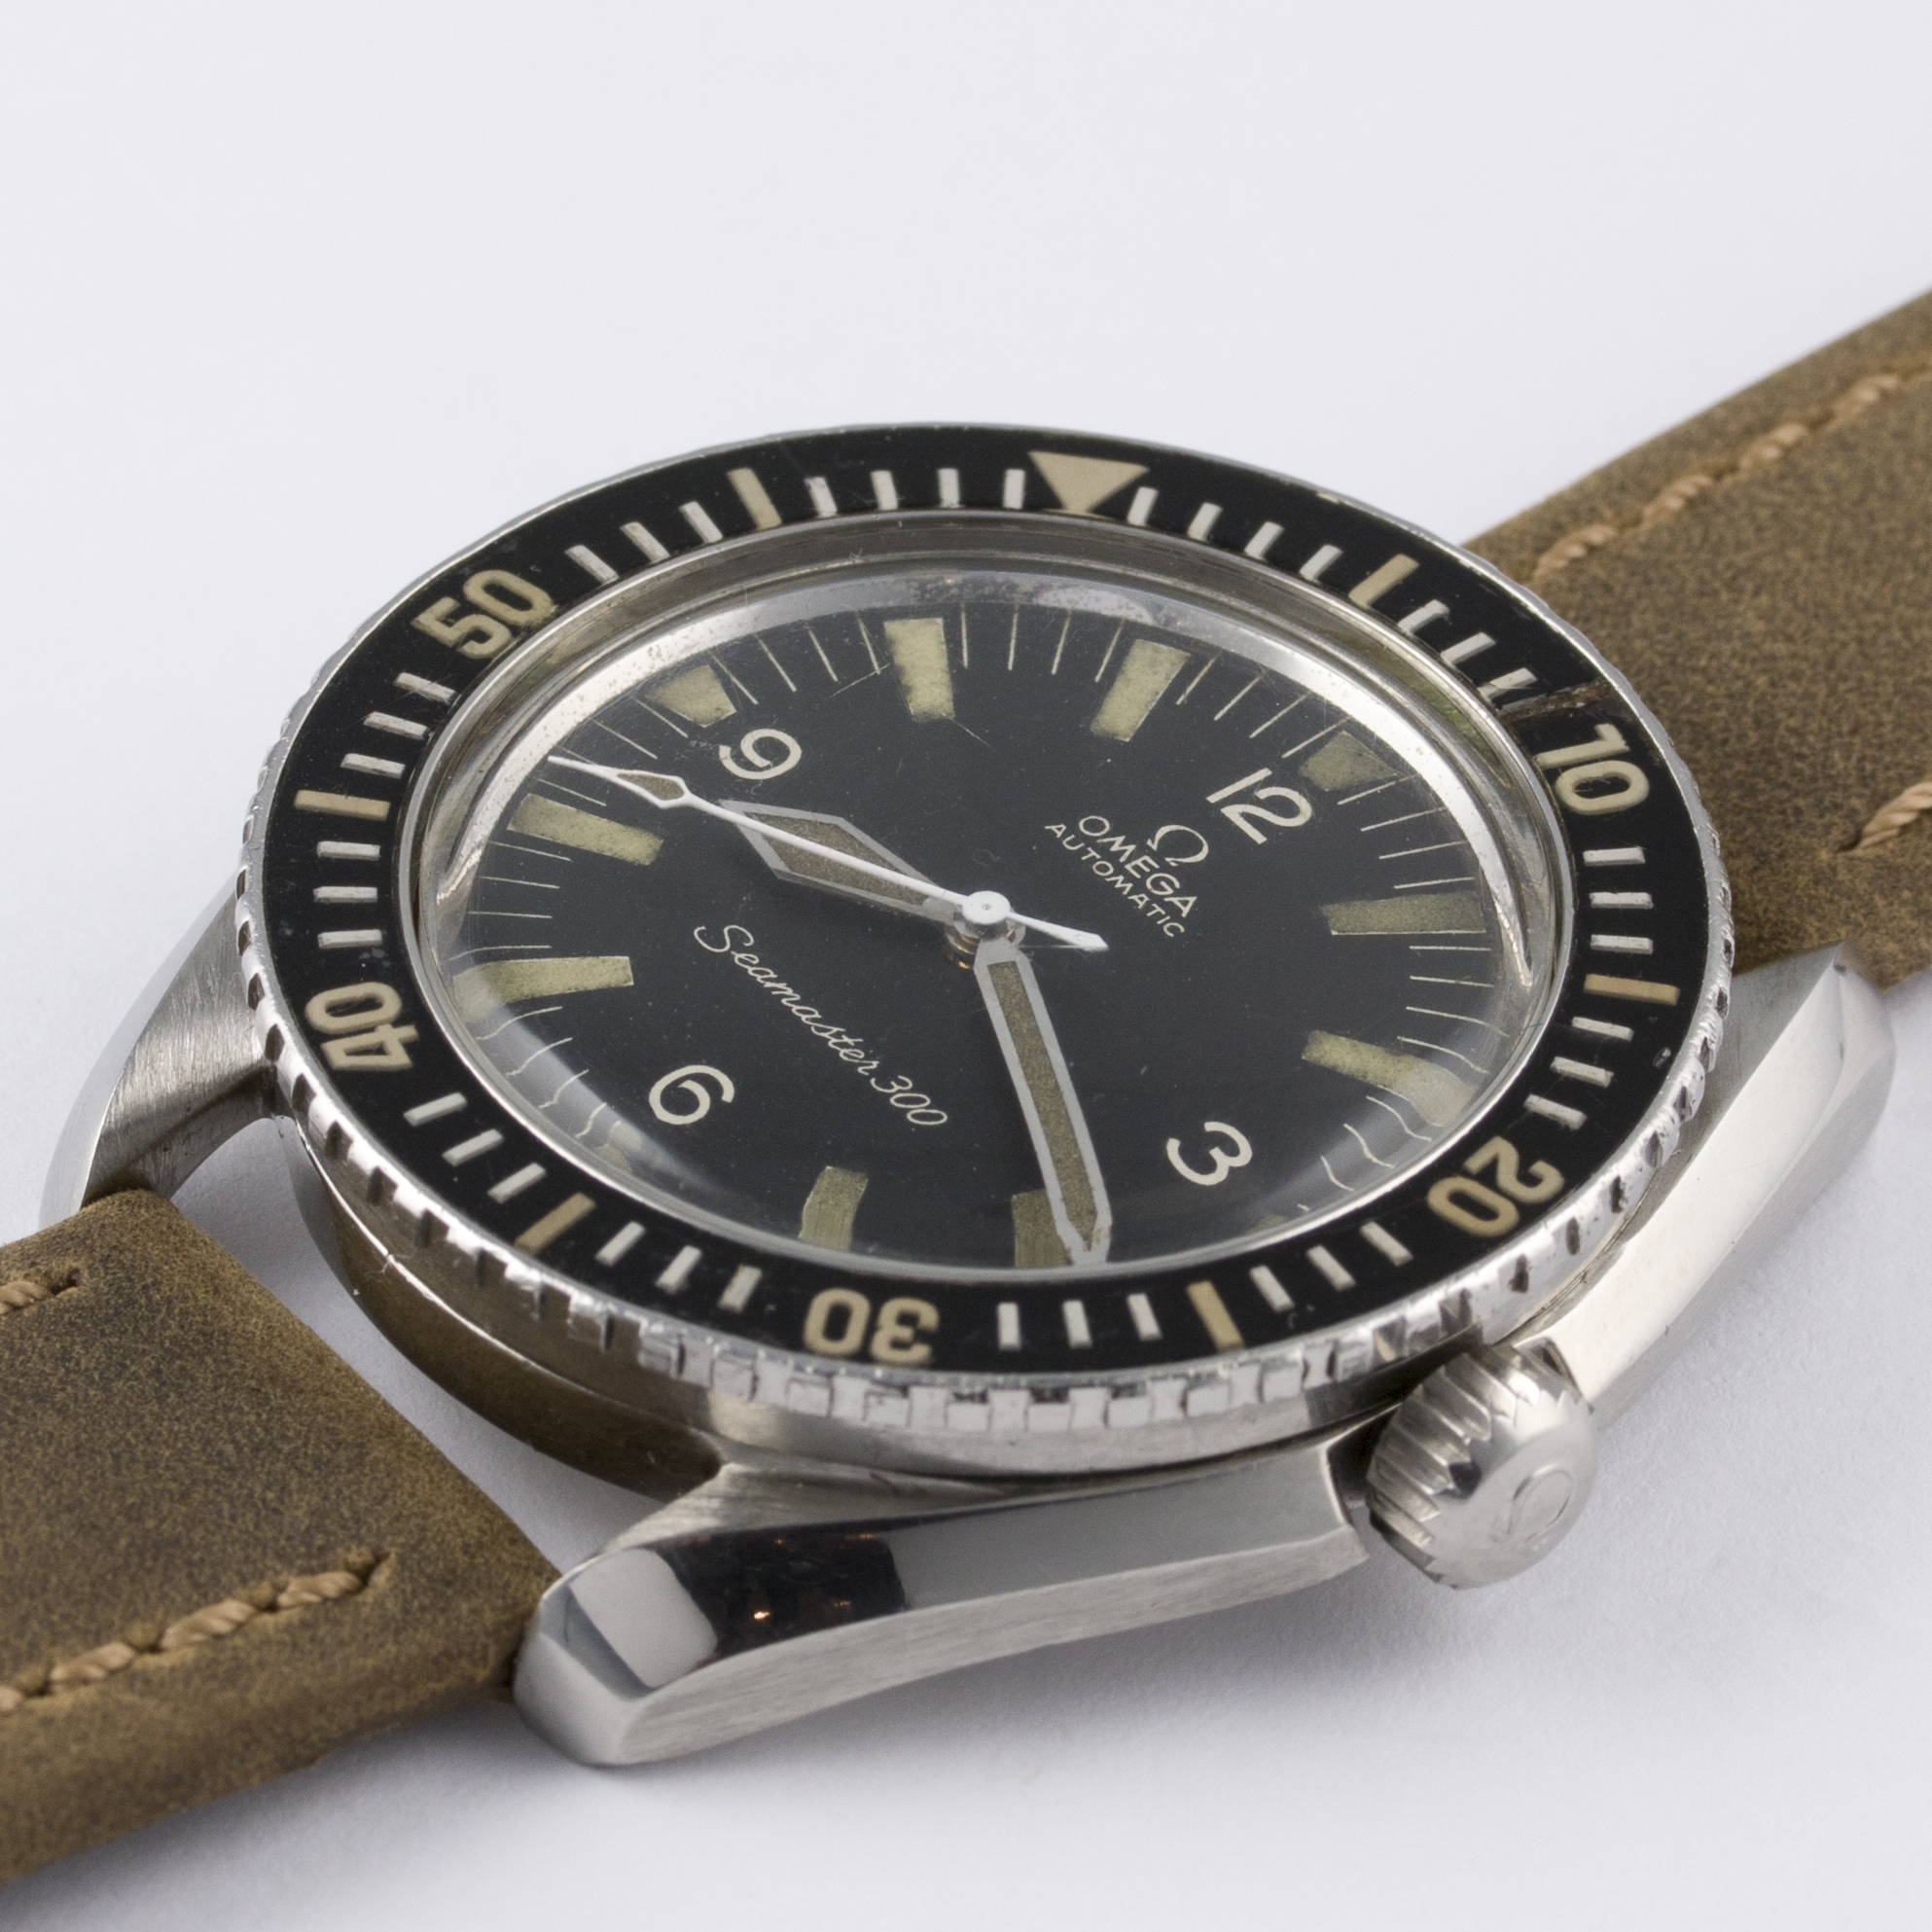 A RARE GENTLEMAN'S STAINLESS STEEL OMEGA SEAMASTER 300 WRIST WATCH CIRCA 1967, REF. 165.024 D: Black - Image 4 of 9